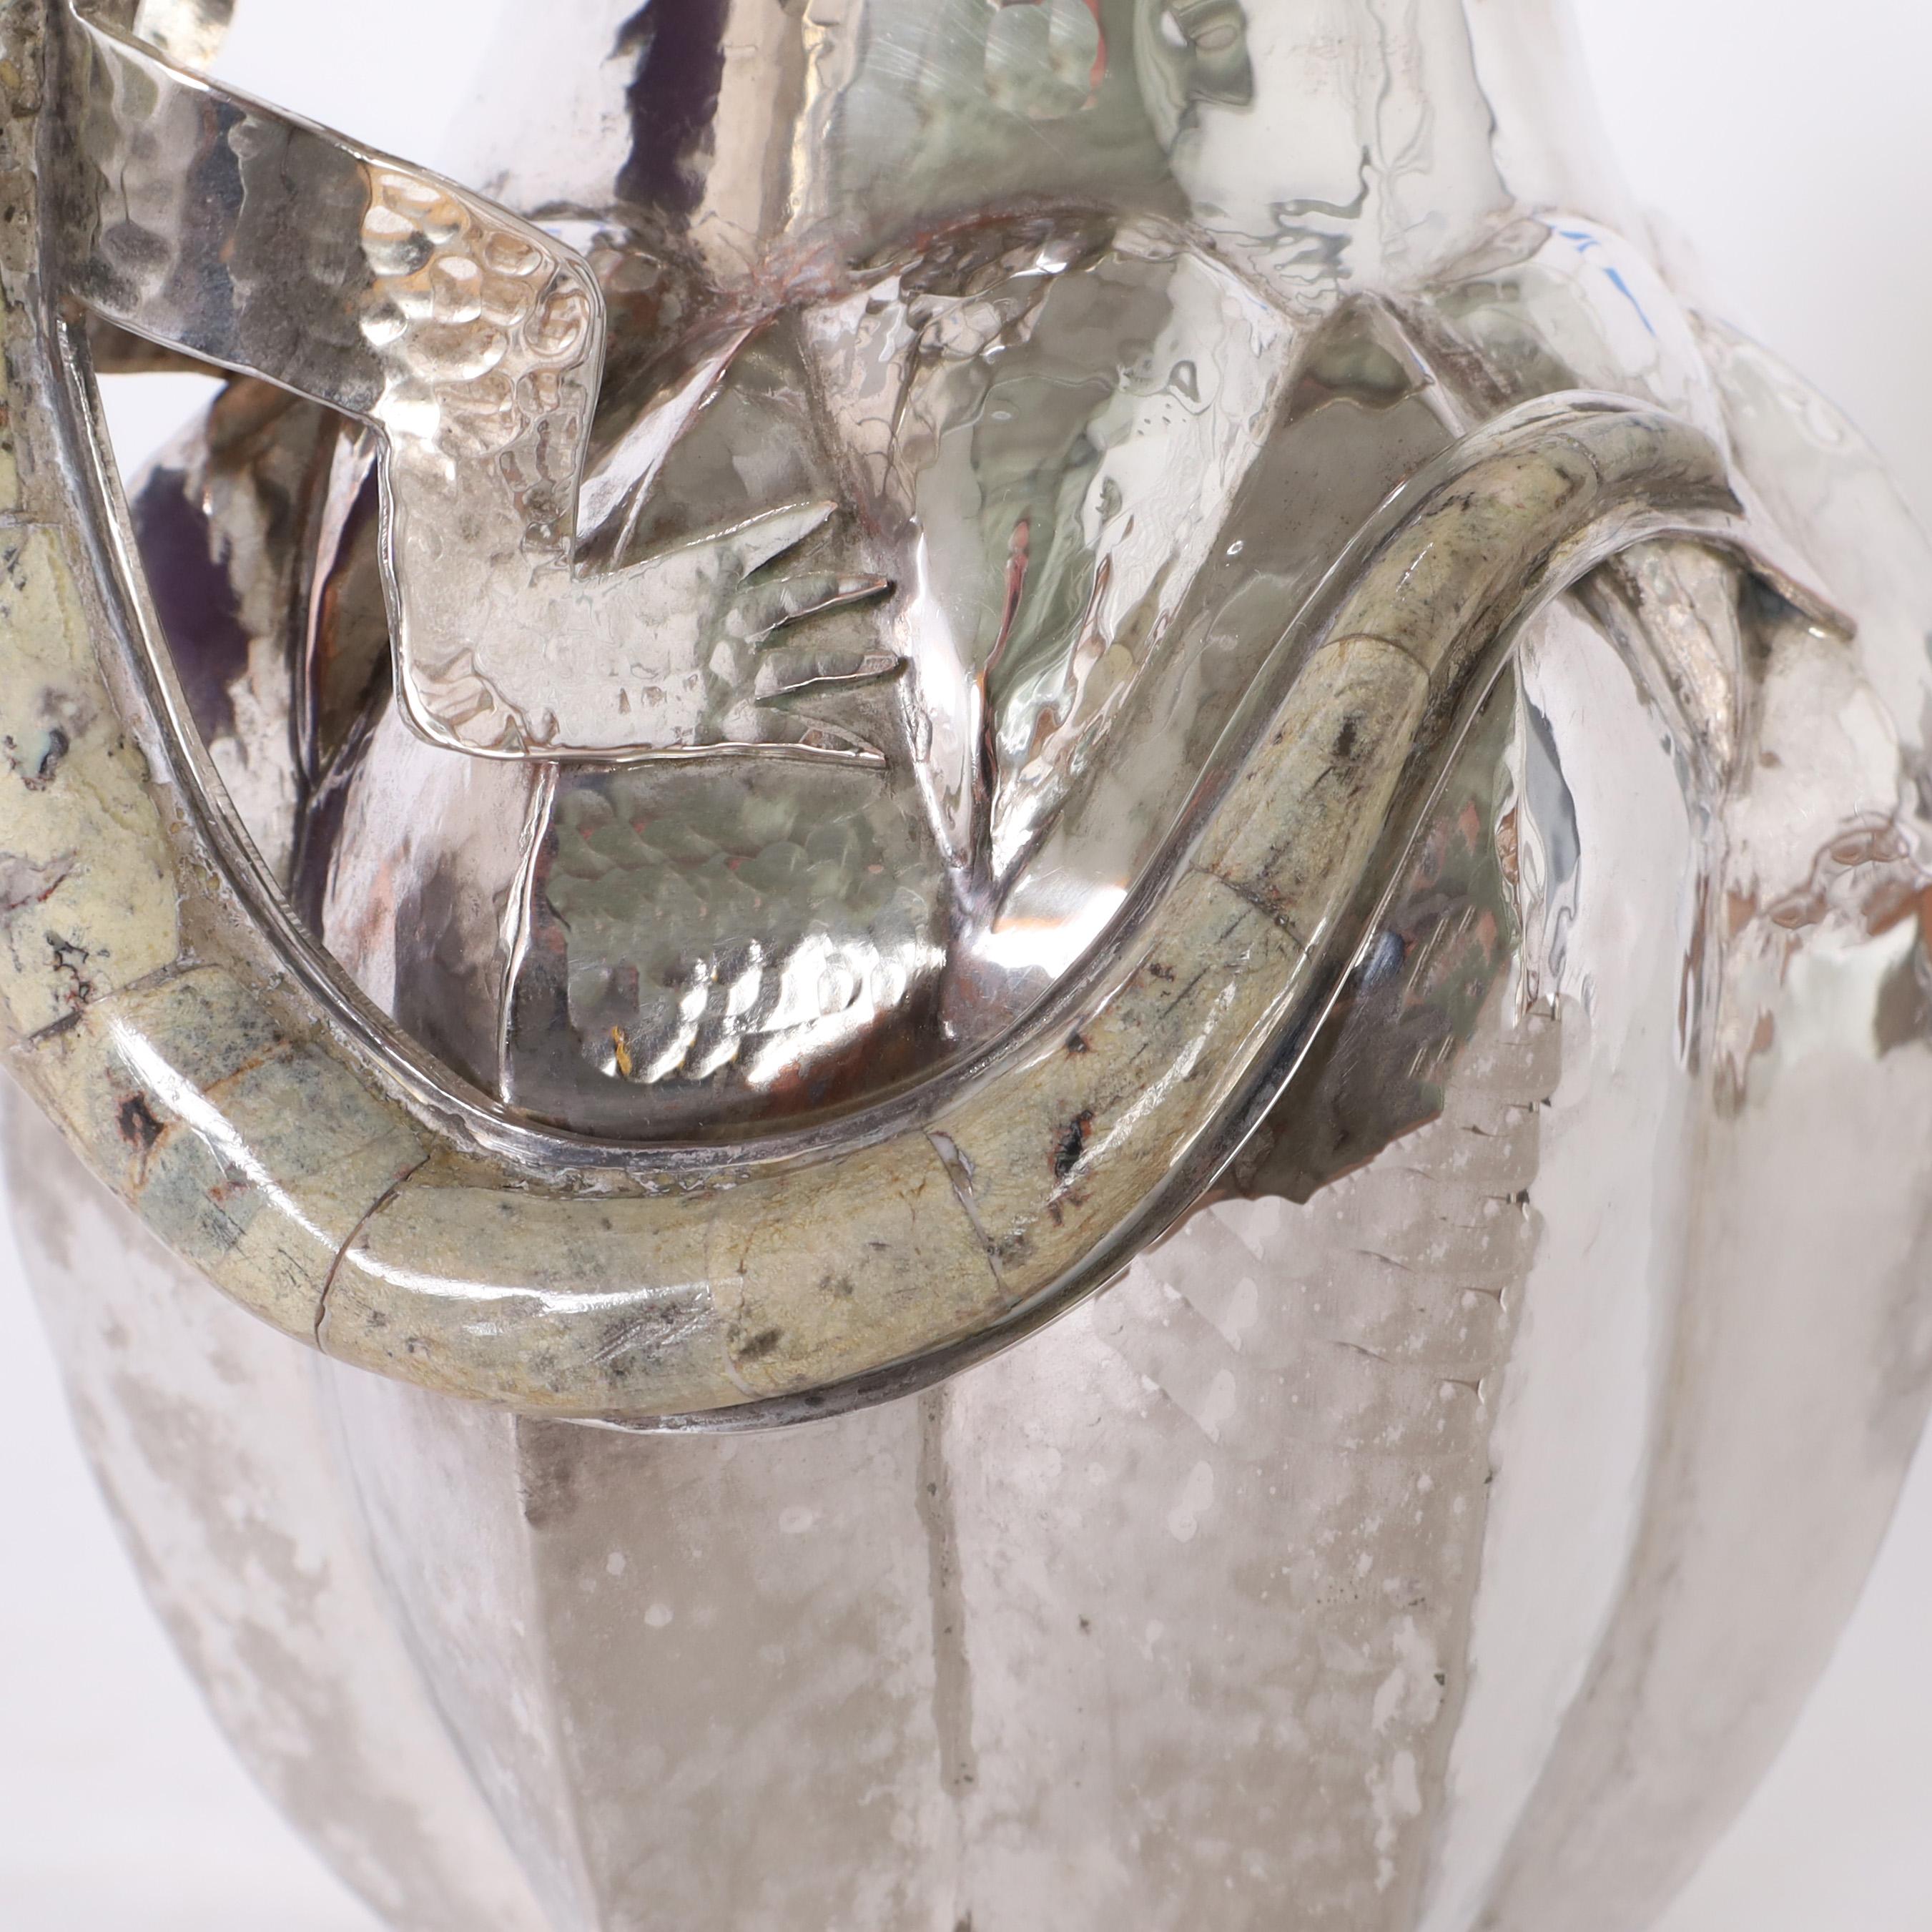 Los Castillo Style Silver Plate Pitcher with Alligator or Lizard For Sale 2